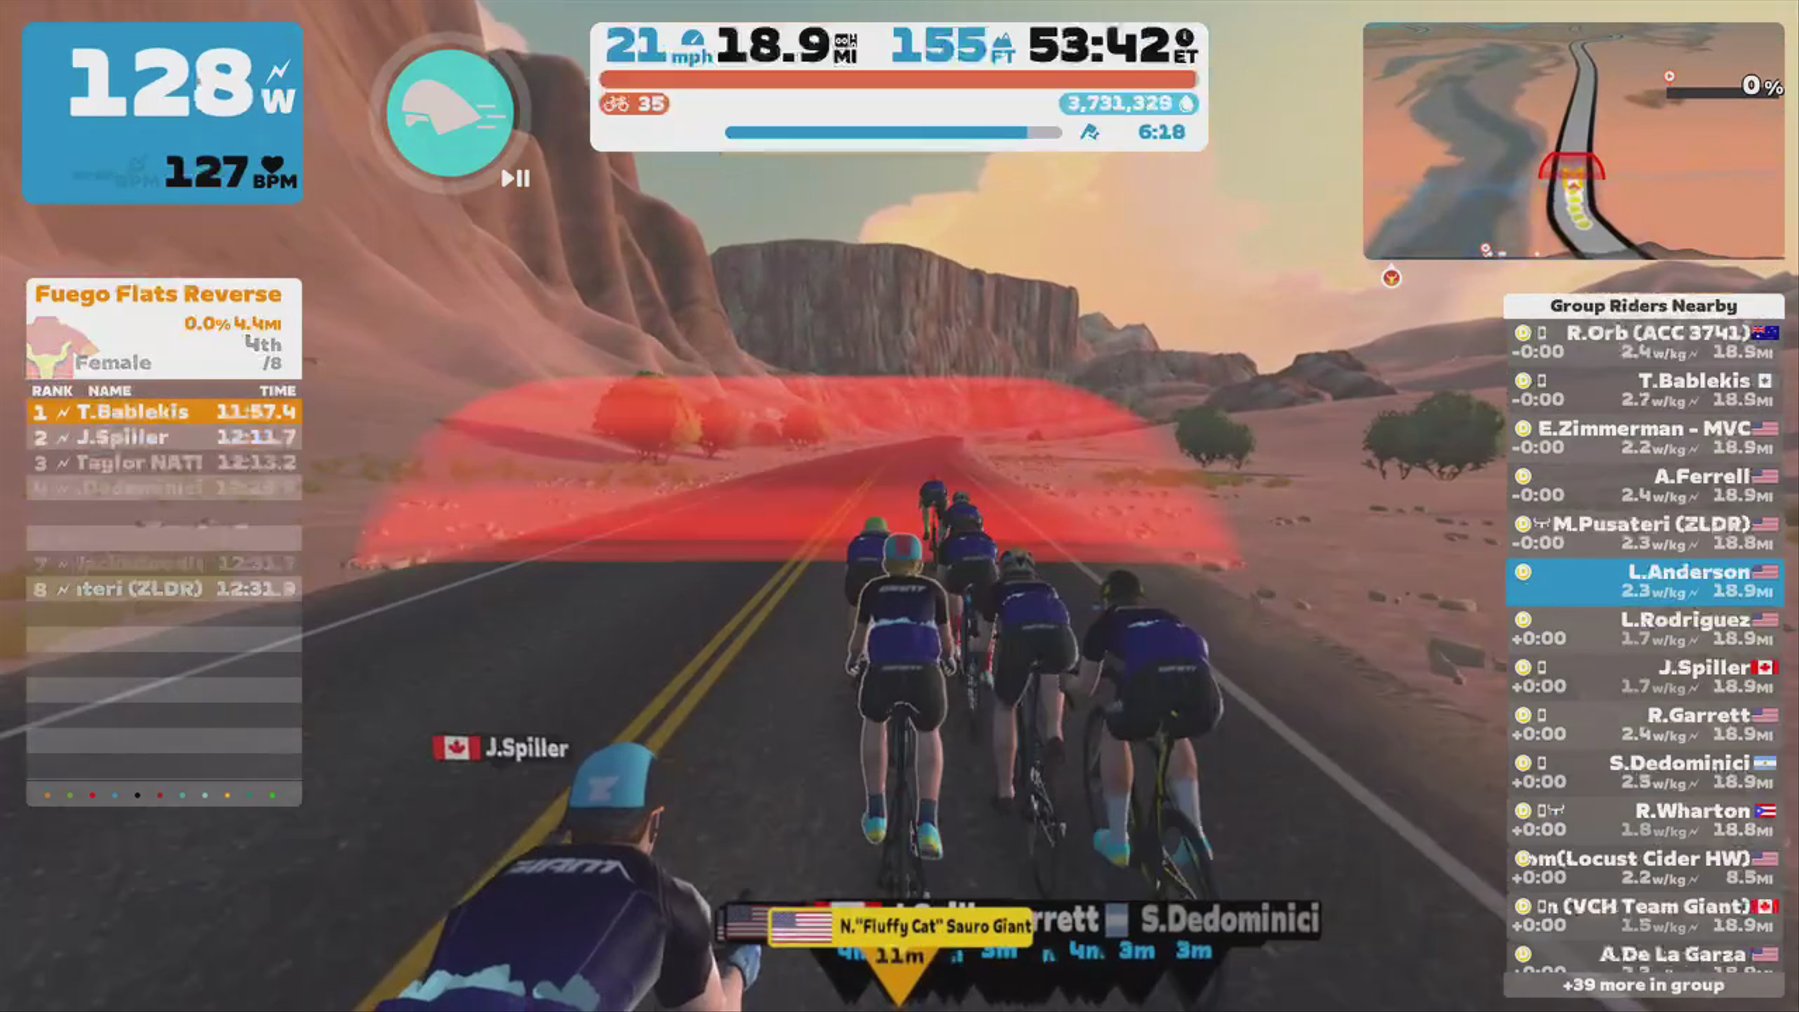 Zwift - Group Ride: Giant Tuesday Ride Series (D) on Tempus Fugit in Watopia